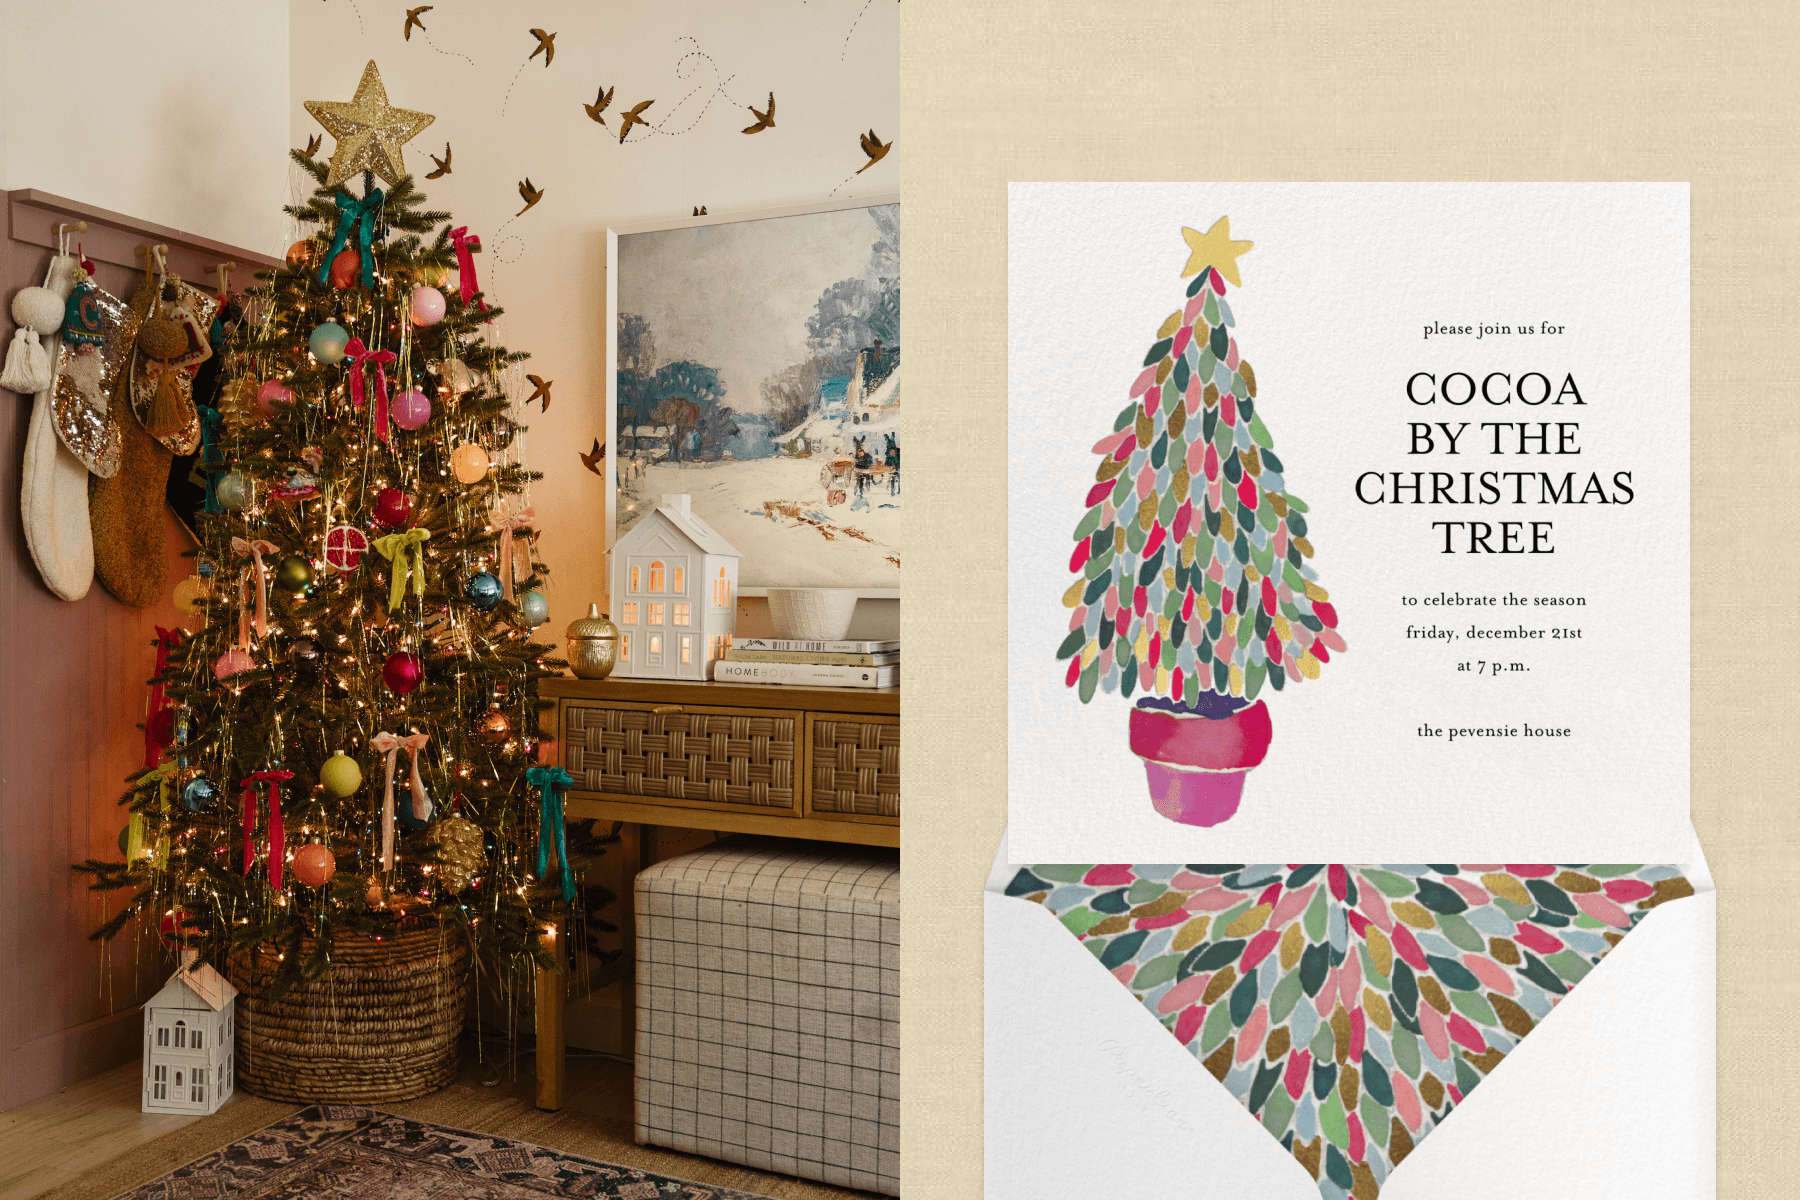 A shabby-chic, maximalist Christmas tree in a wood-paneled corner with colorful bows and ornaments; an invitation with a Christmas tree that appears to be made of rainbow-colored feathers.